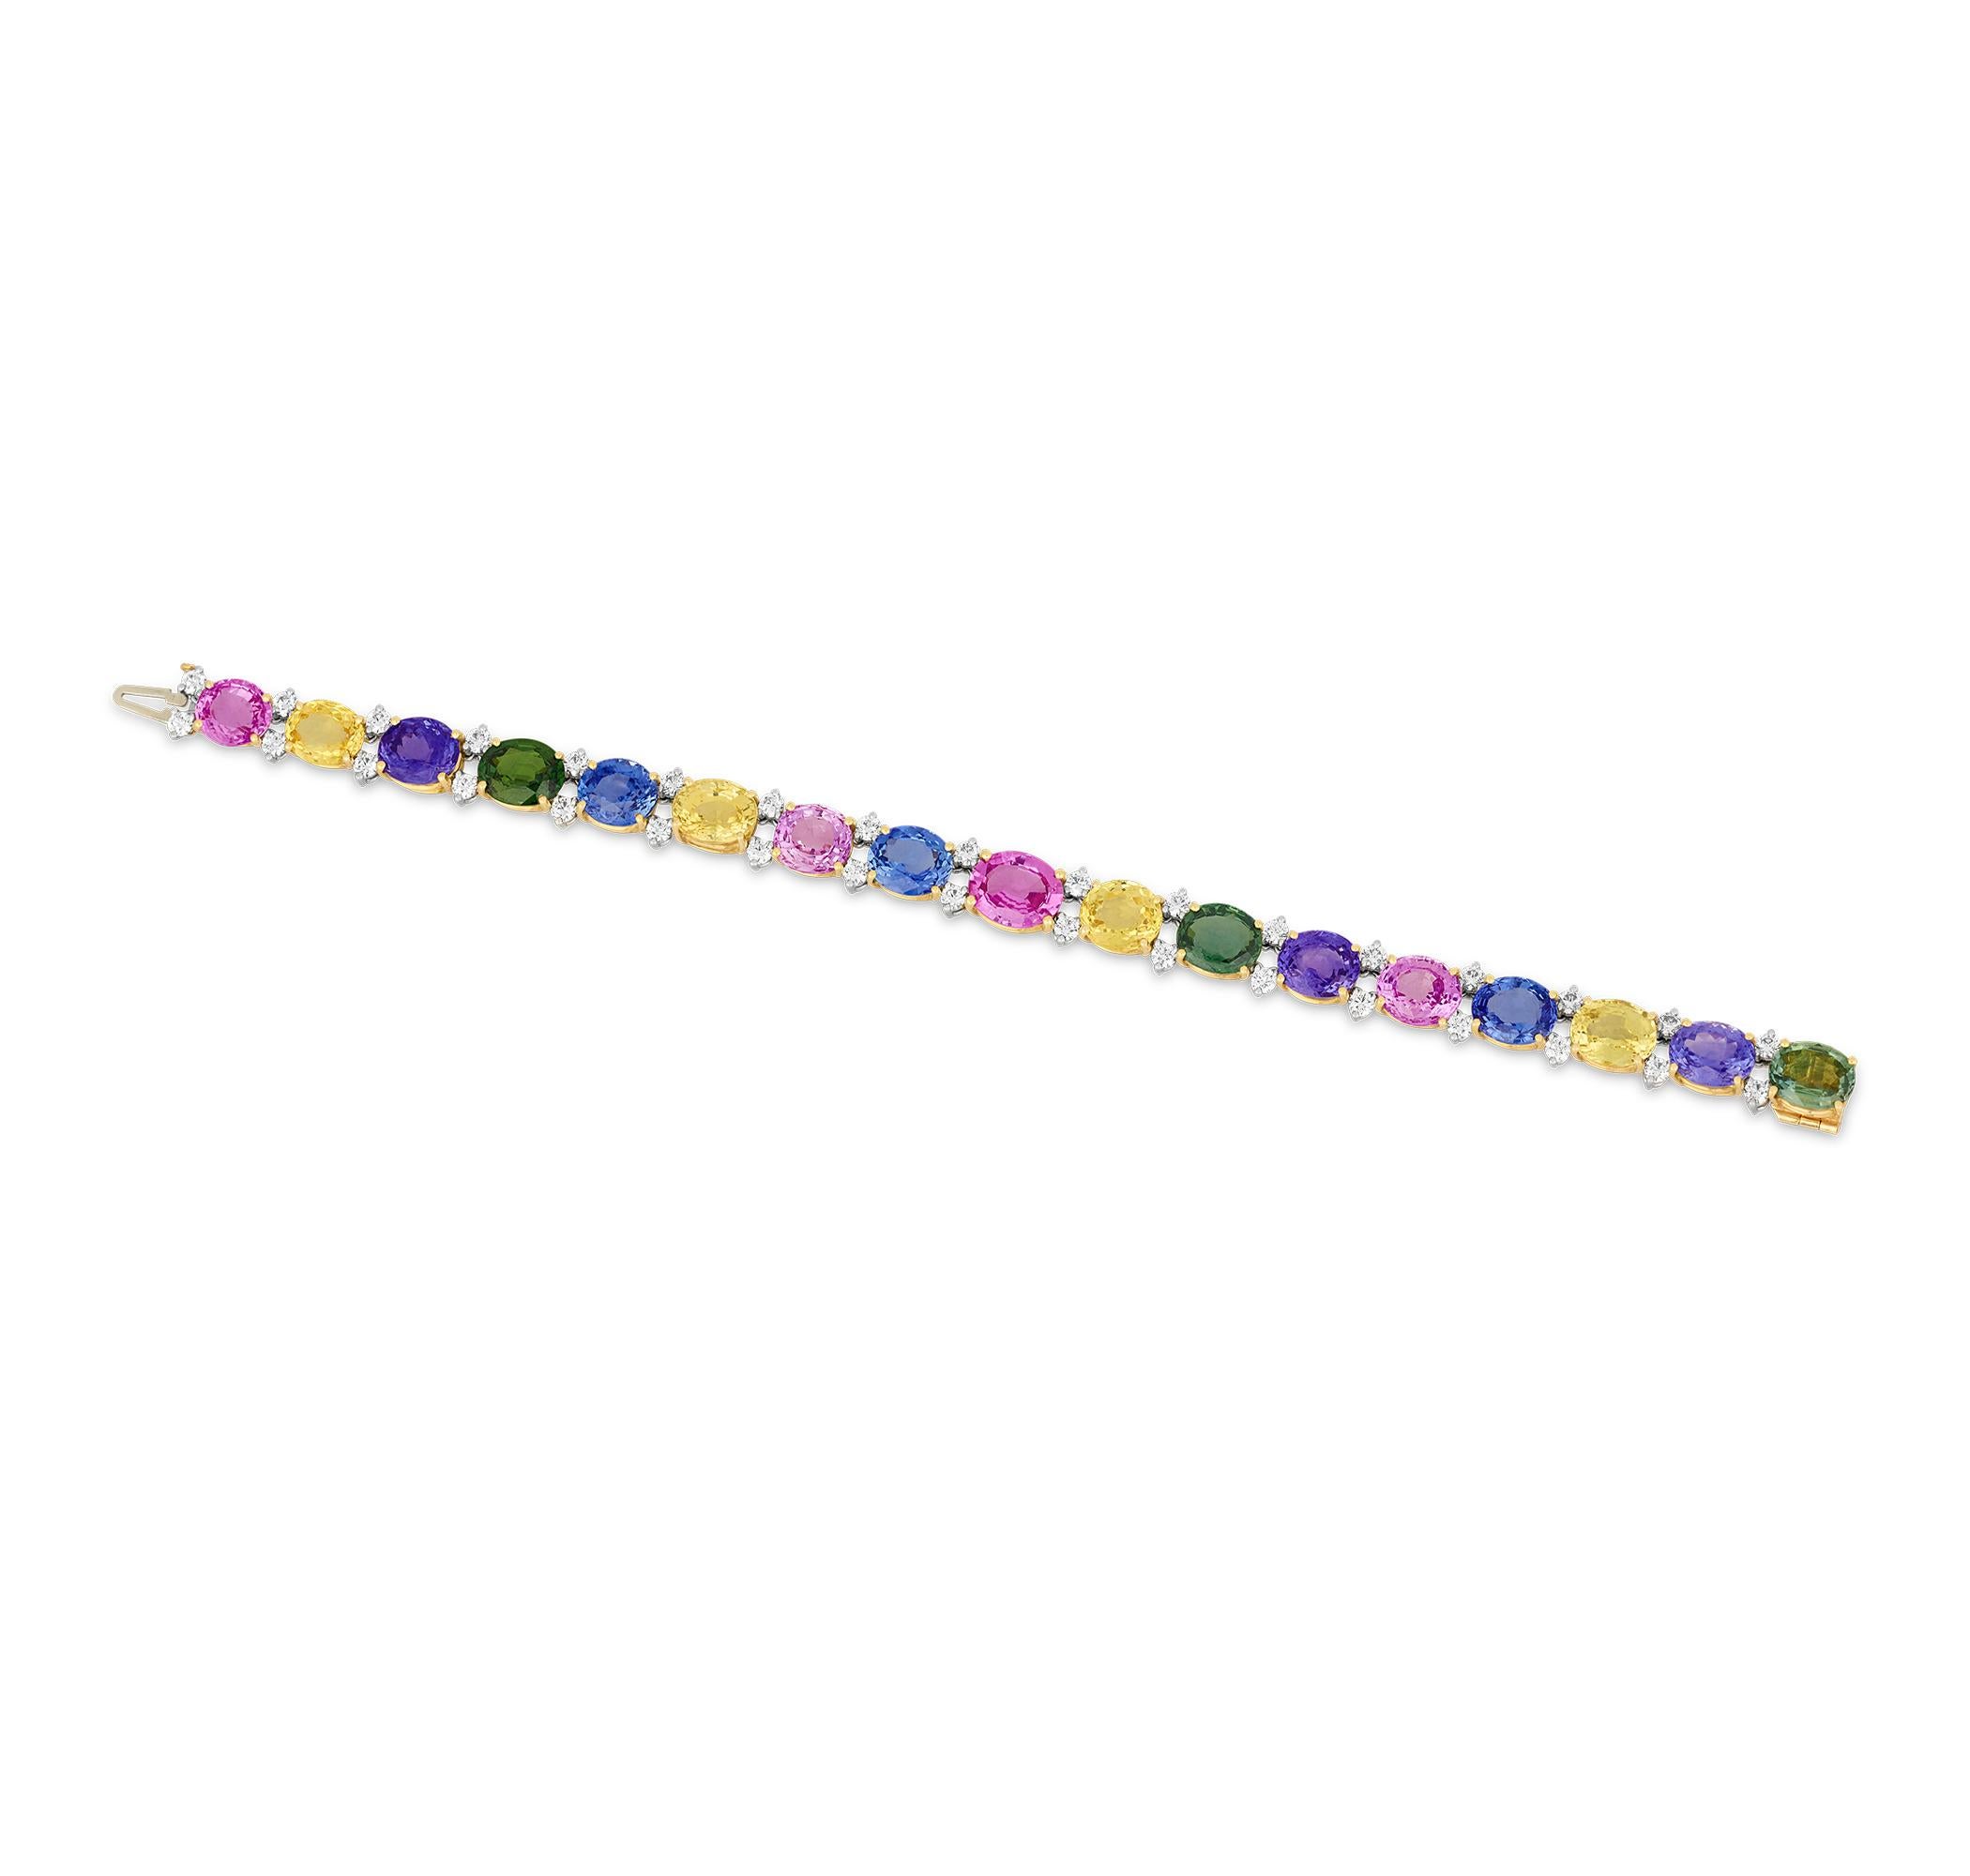 This exceptional bracelet features an array of multi-colored sapphires complemented by dazzling diamonds. The 17 sapphires, totaling an impressive 43.49 carats, offer a rainbow of vibrant, perfectly matched hues, including deep ocean blues, lush